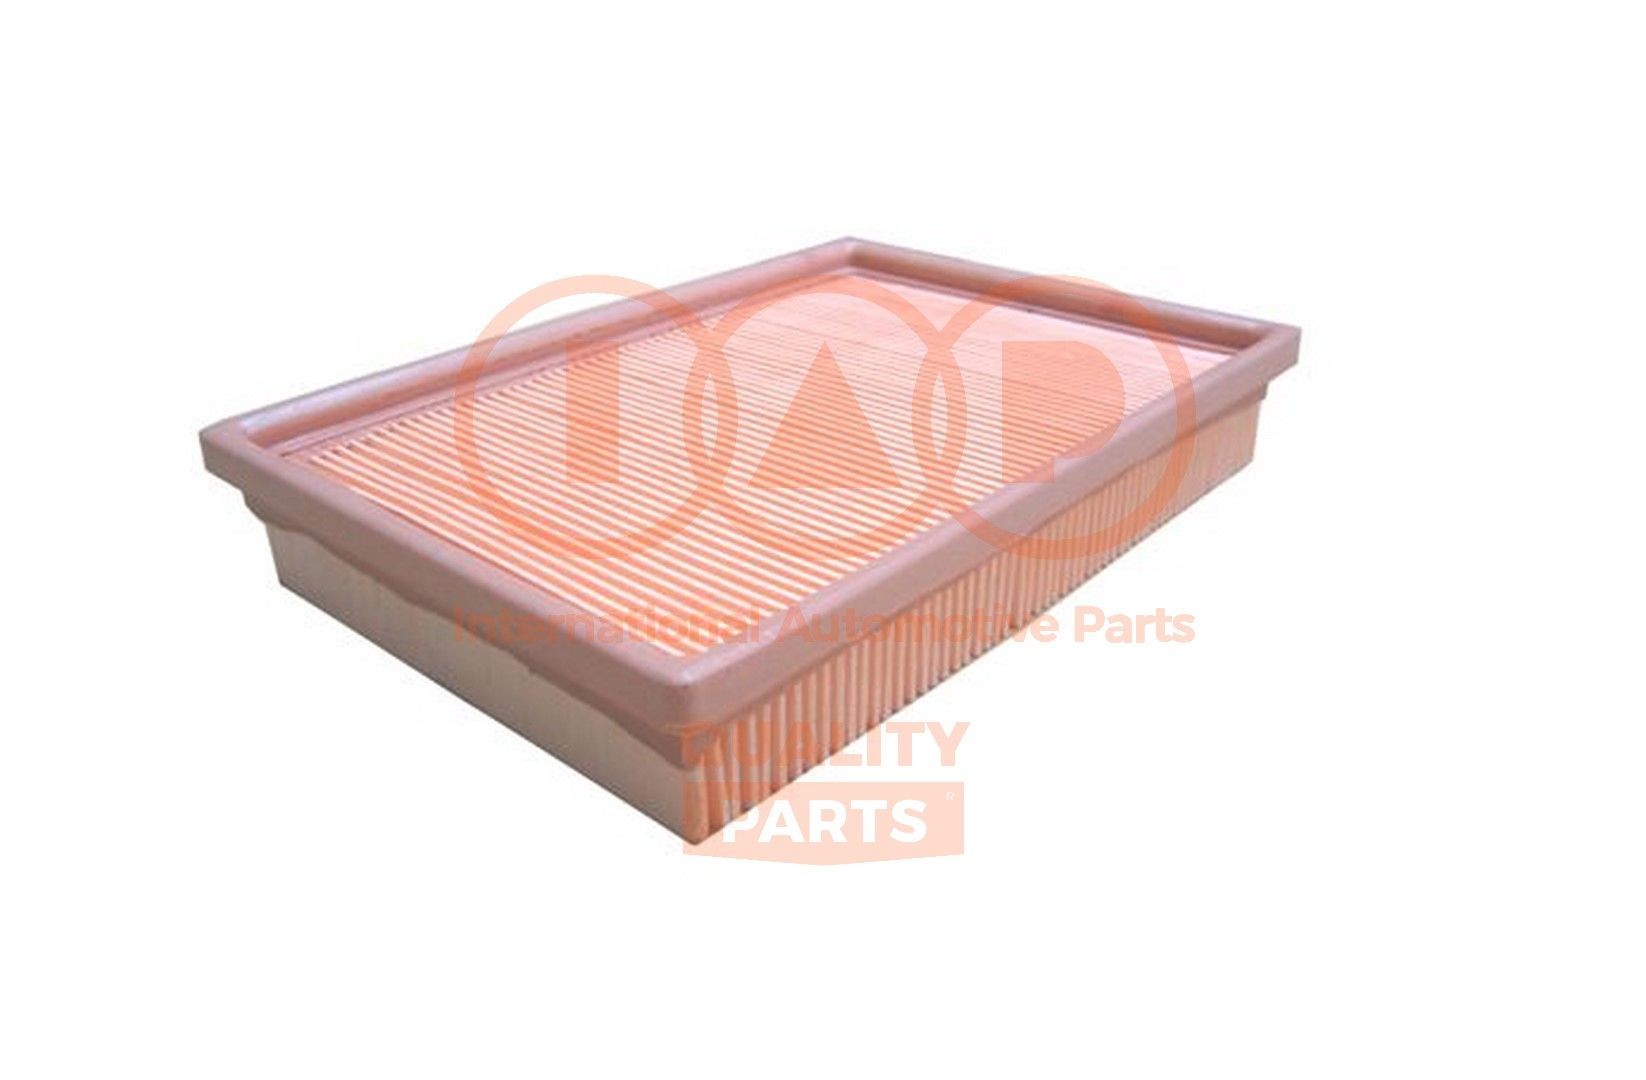 IAP QUALITY PARTS 121-11051 Air filter HE19-23-603 -9A